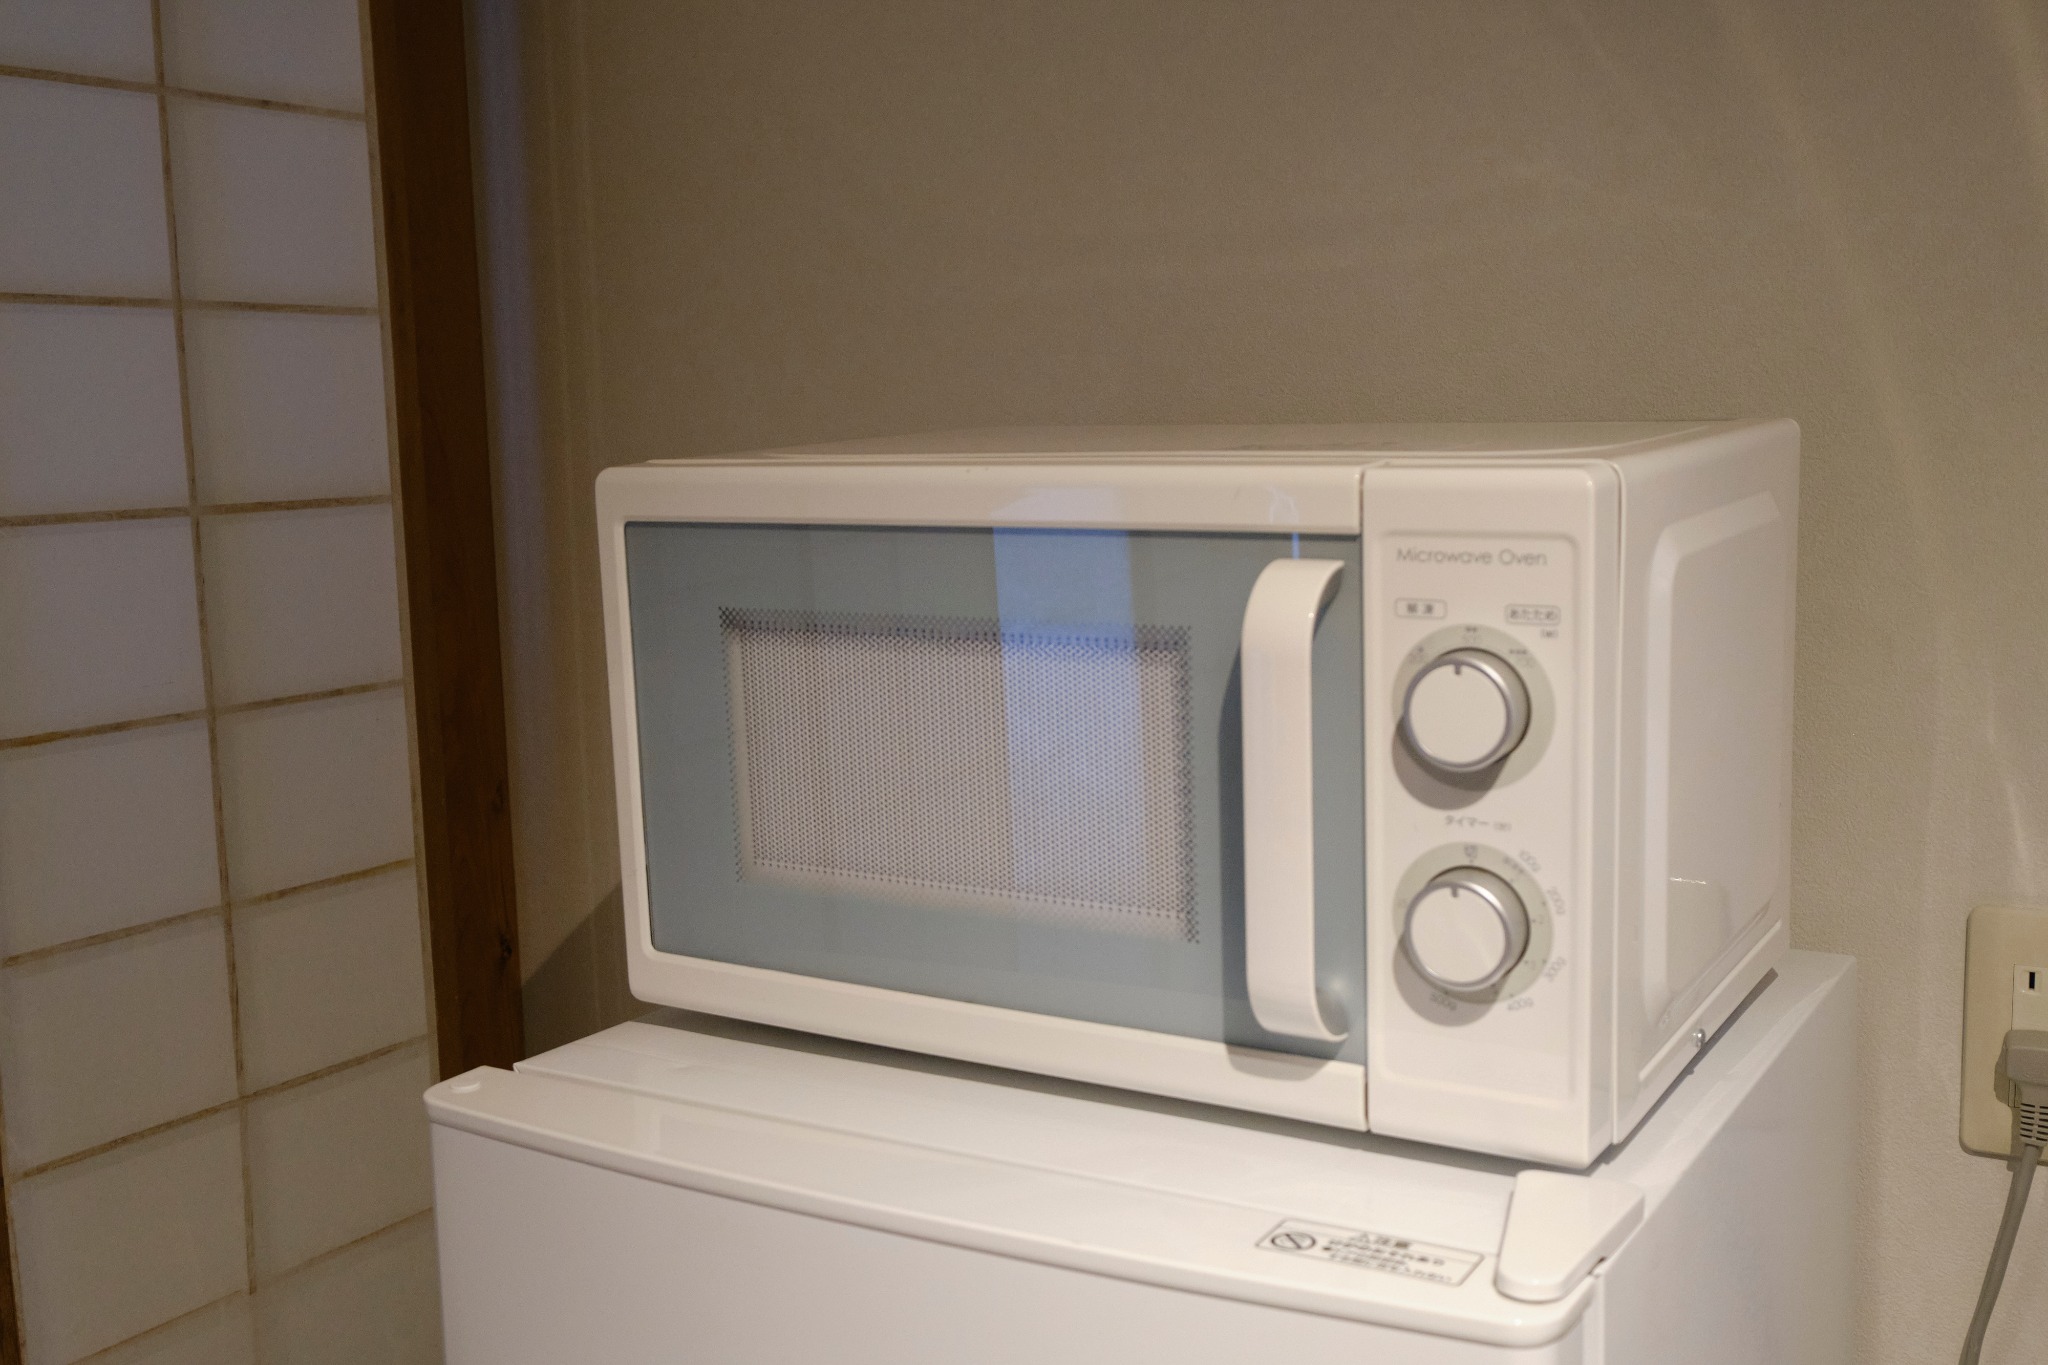 There is a microwave, a refrigerator, a toaster oven and an IH stove in house. 電子レンジ、冷蔵庫、オーブントースターとIHコンロがあります。